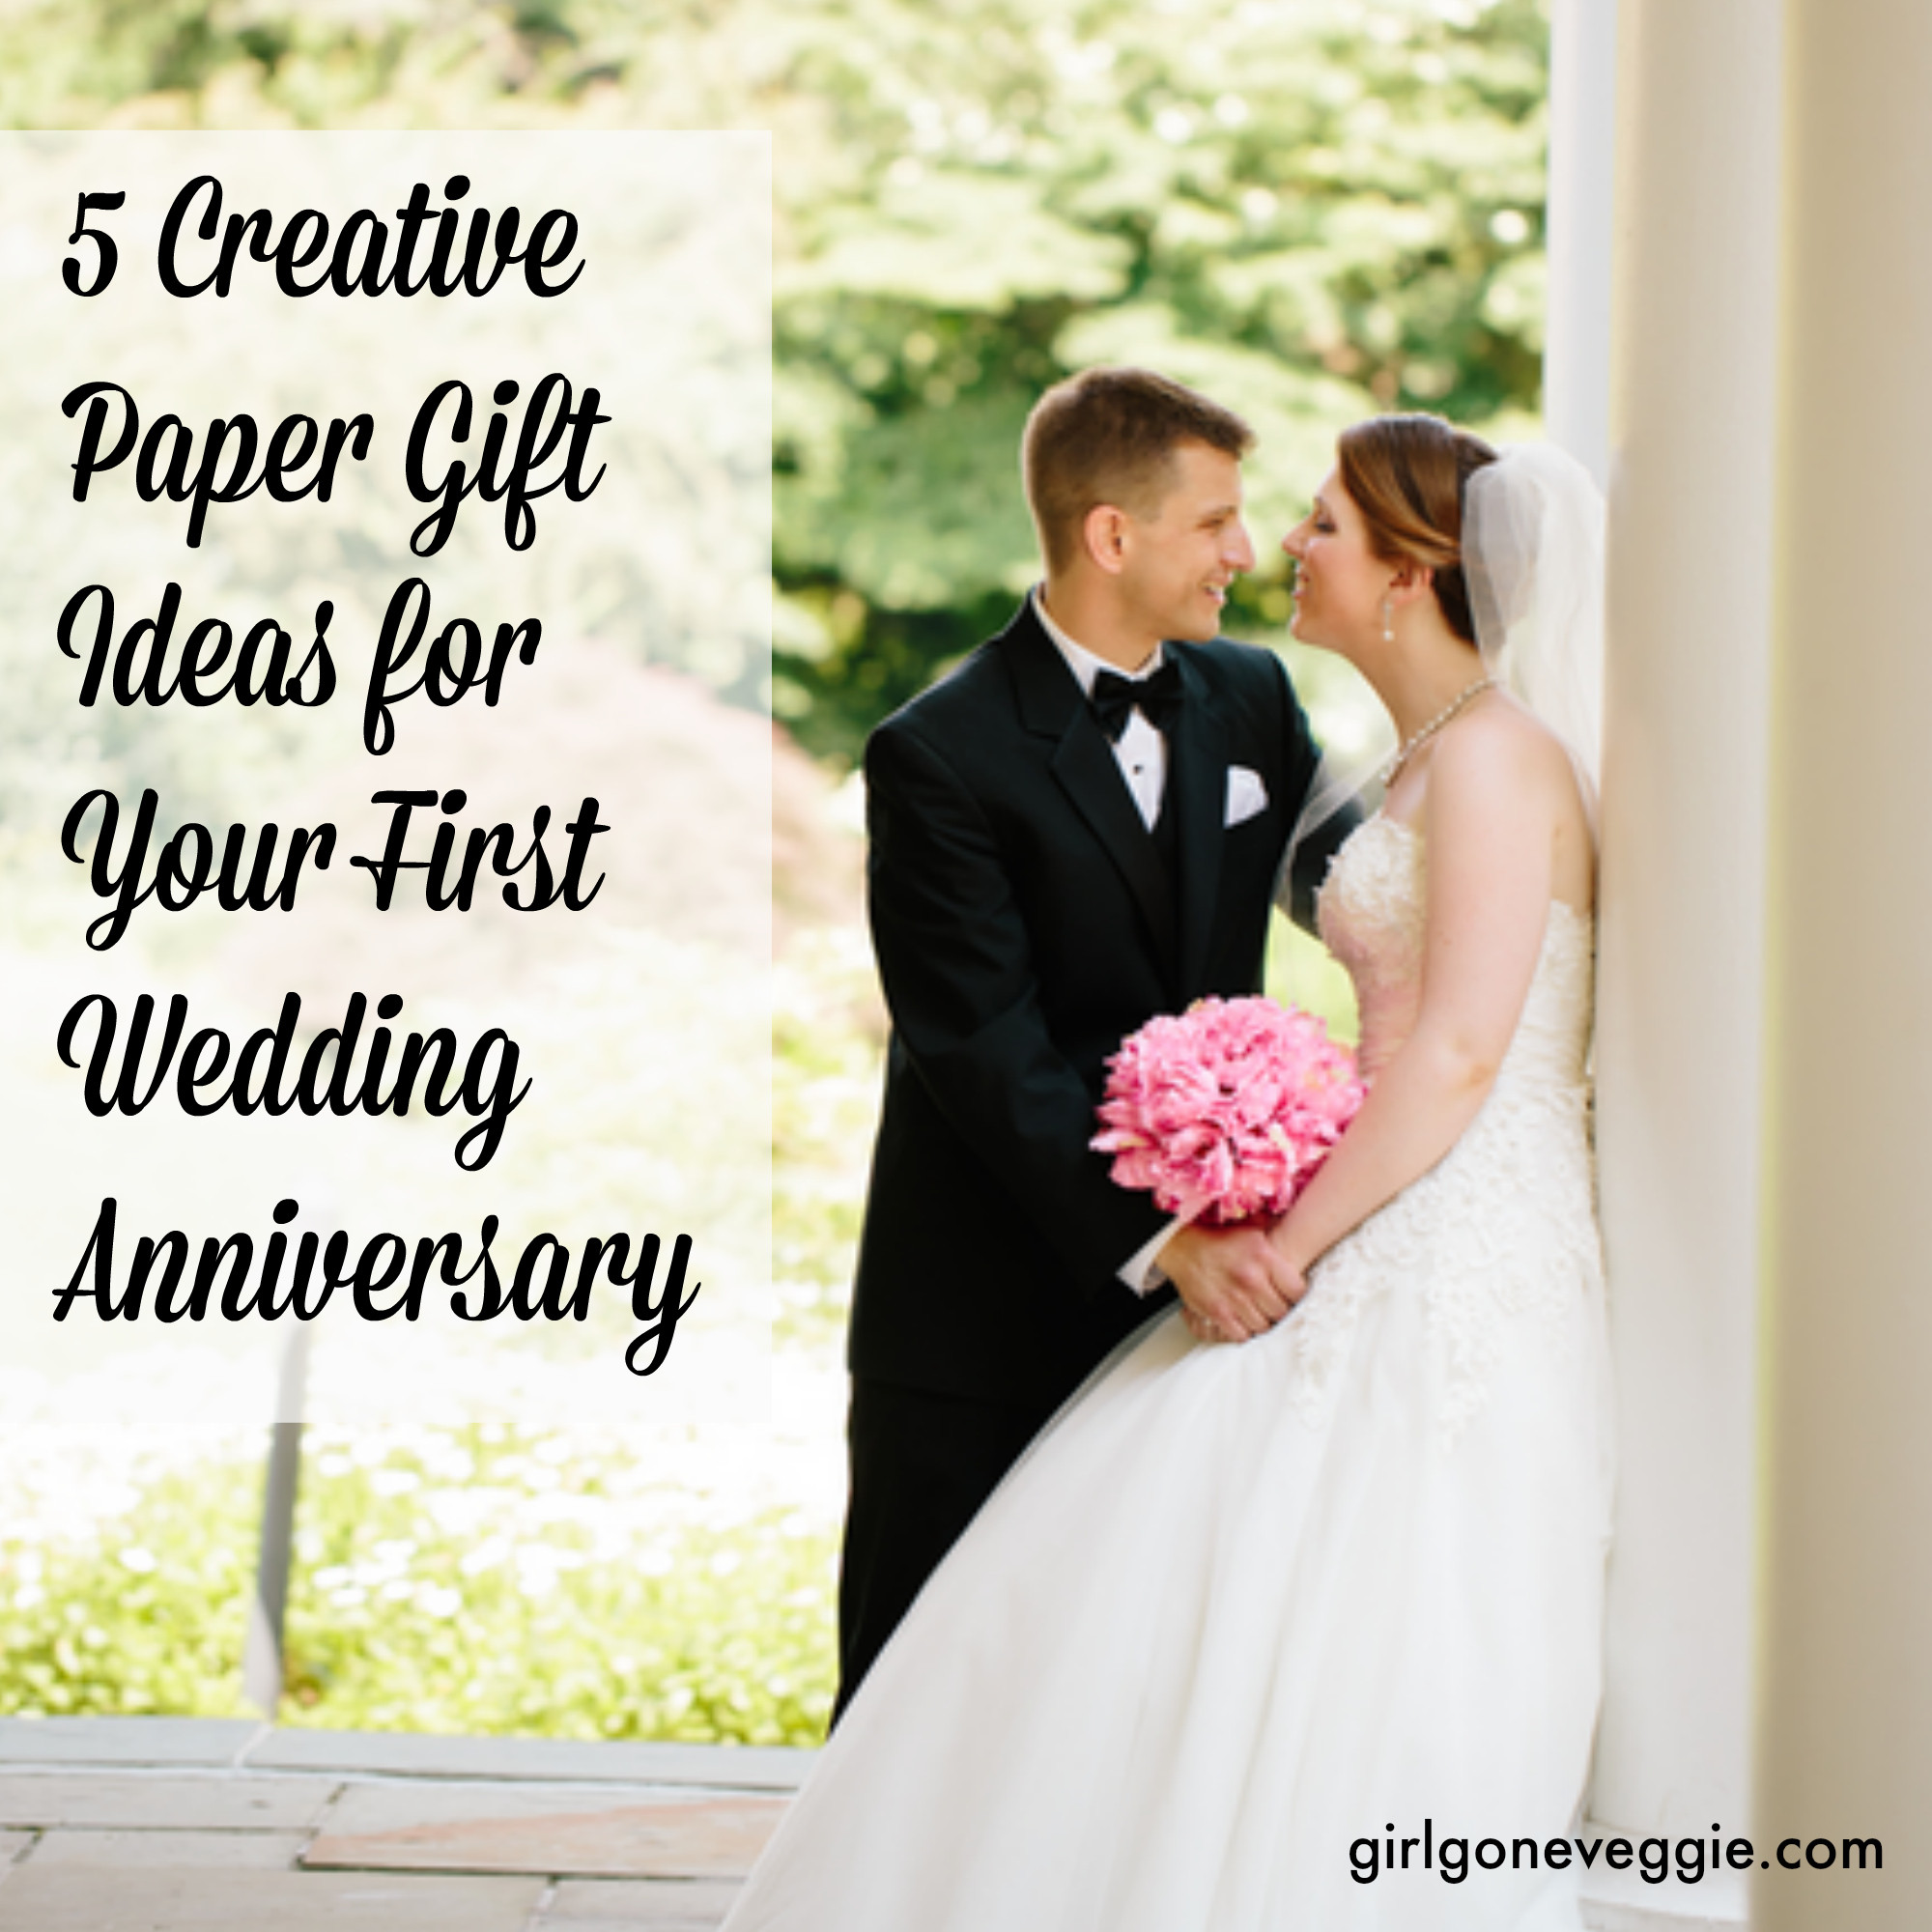 1st Wedding Anniversary Gift Ideas For Her
 5 Creative Paper Gift Ideas for Your 1st Wedding Anniversary